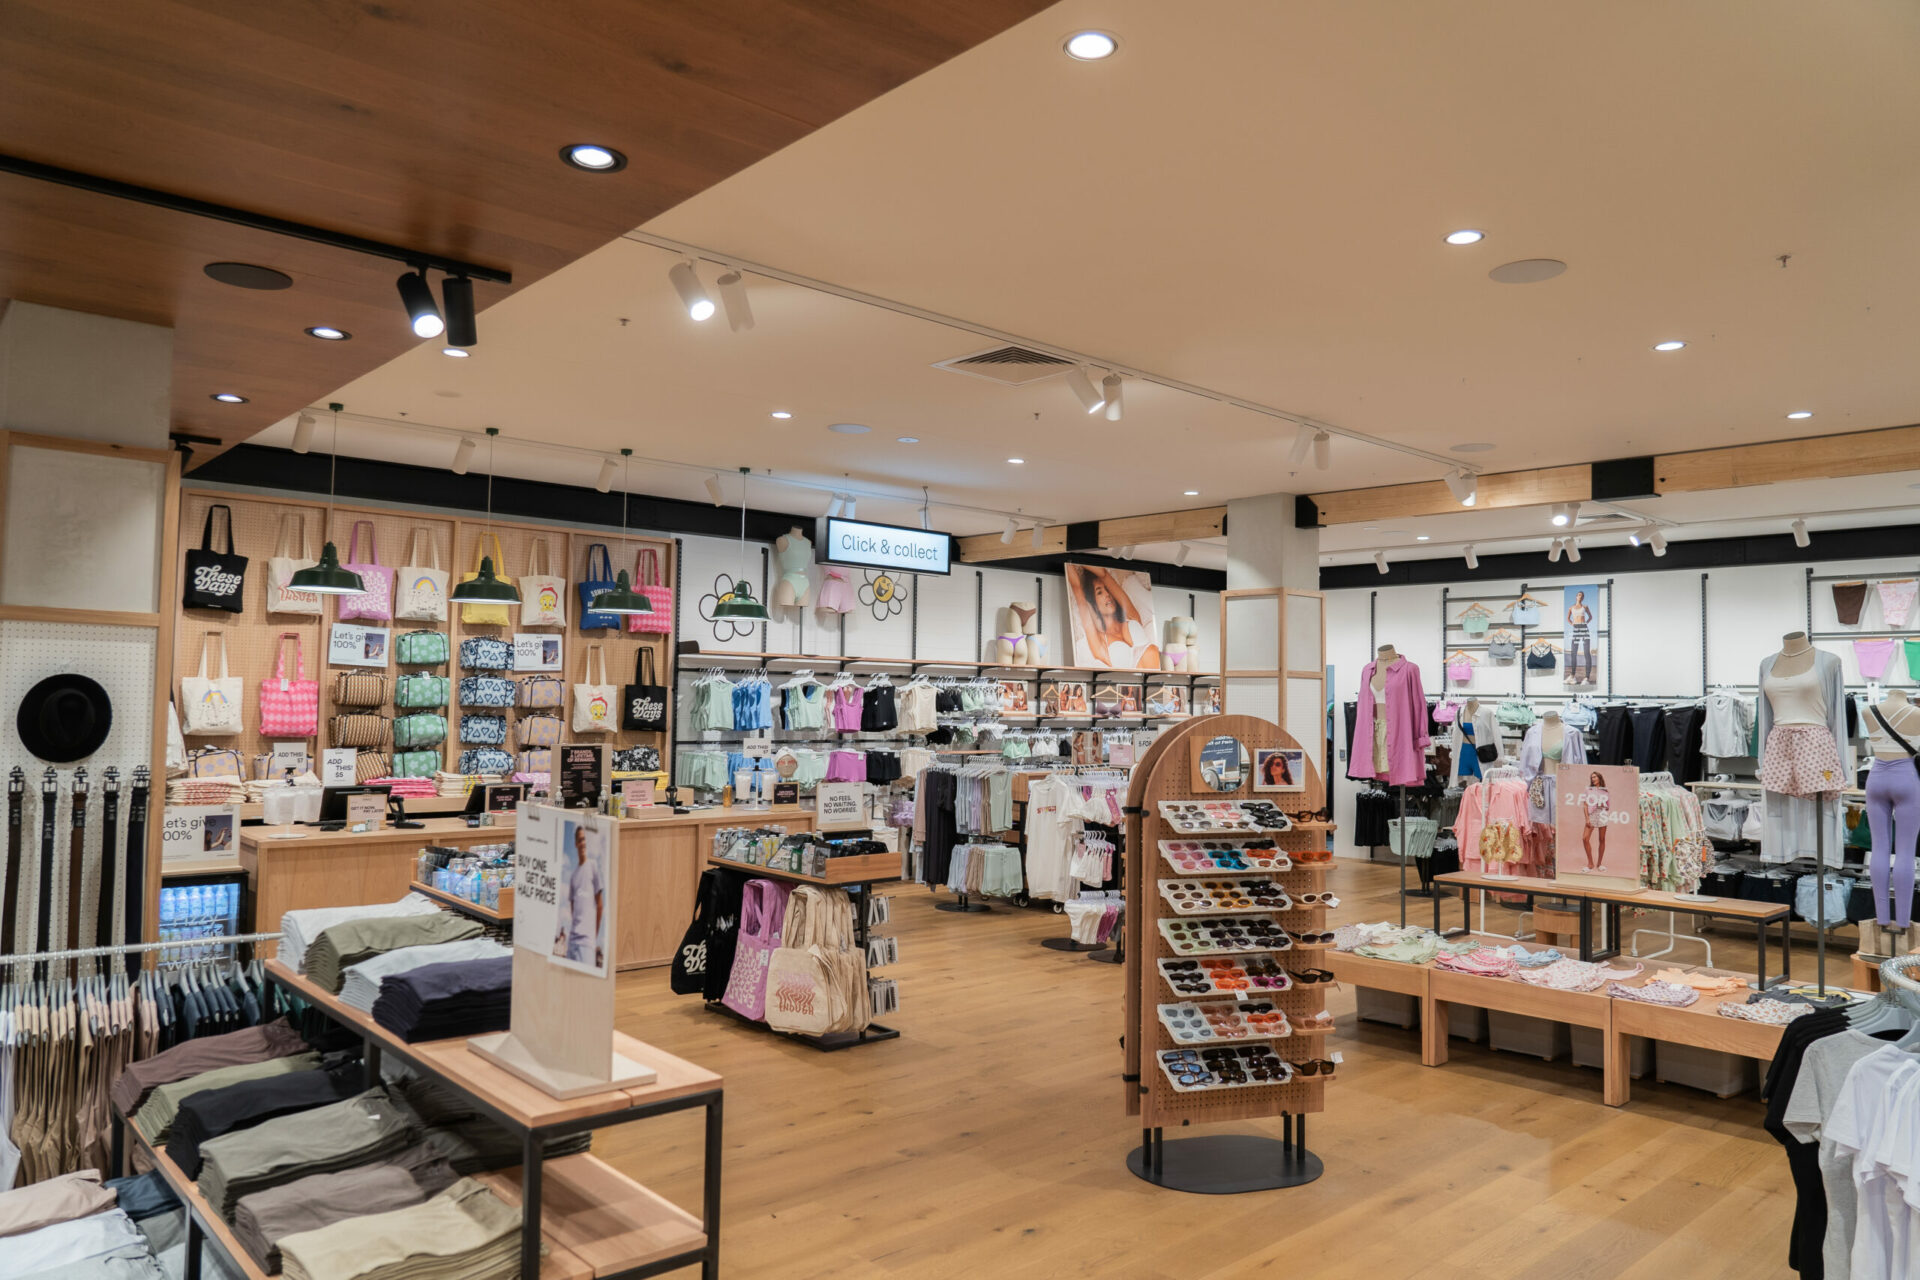 Interior Shot Of A Clothing Store